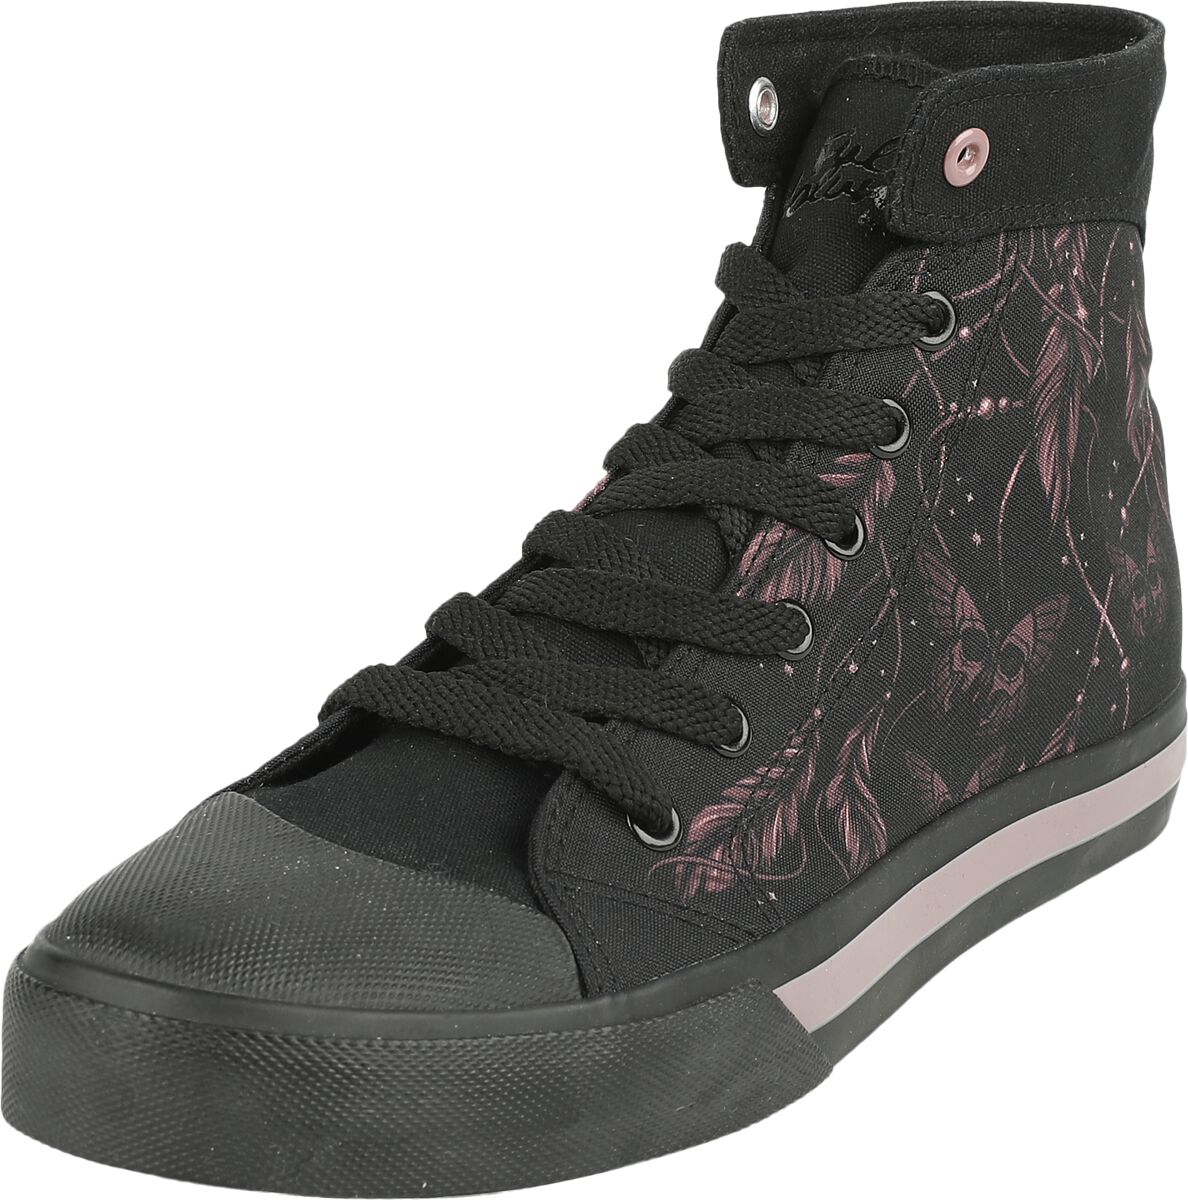 Full Volume by EMP Sneaker with Feathers and Butterflies Sneaker high schwarz in EU39